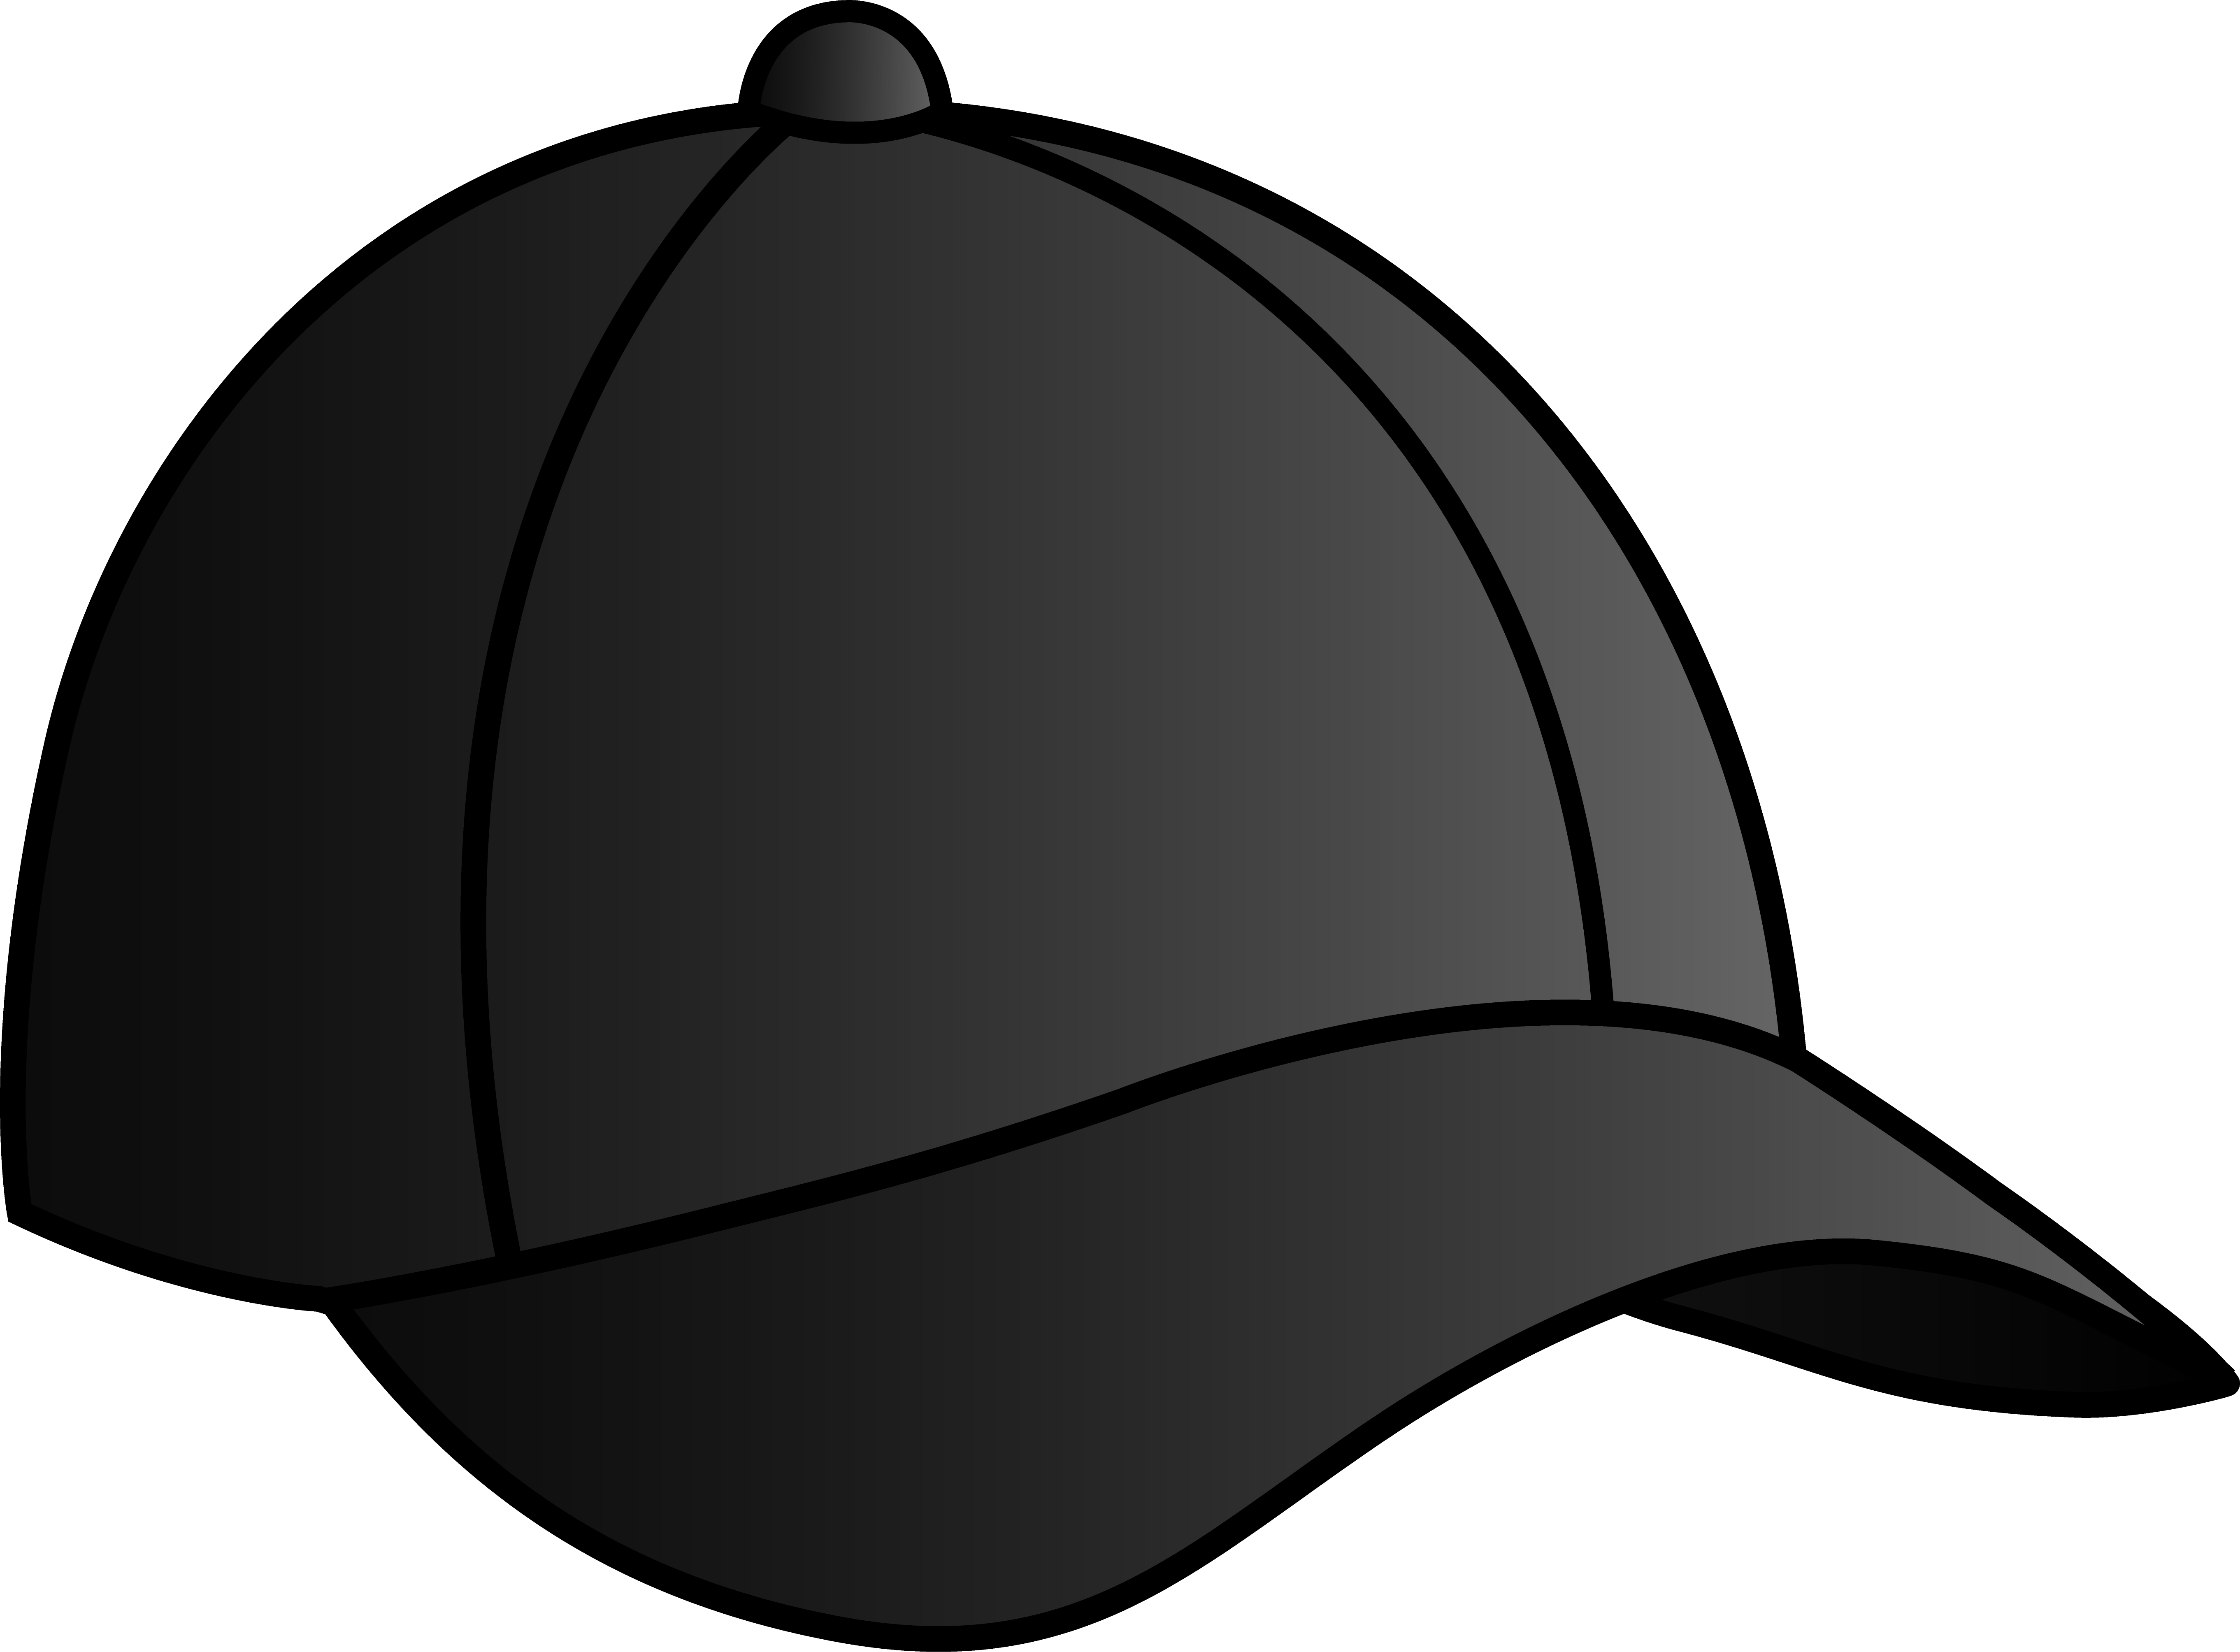 Cartoon Baseball Hats Images & Pictures - Becuo